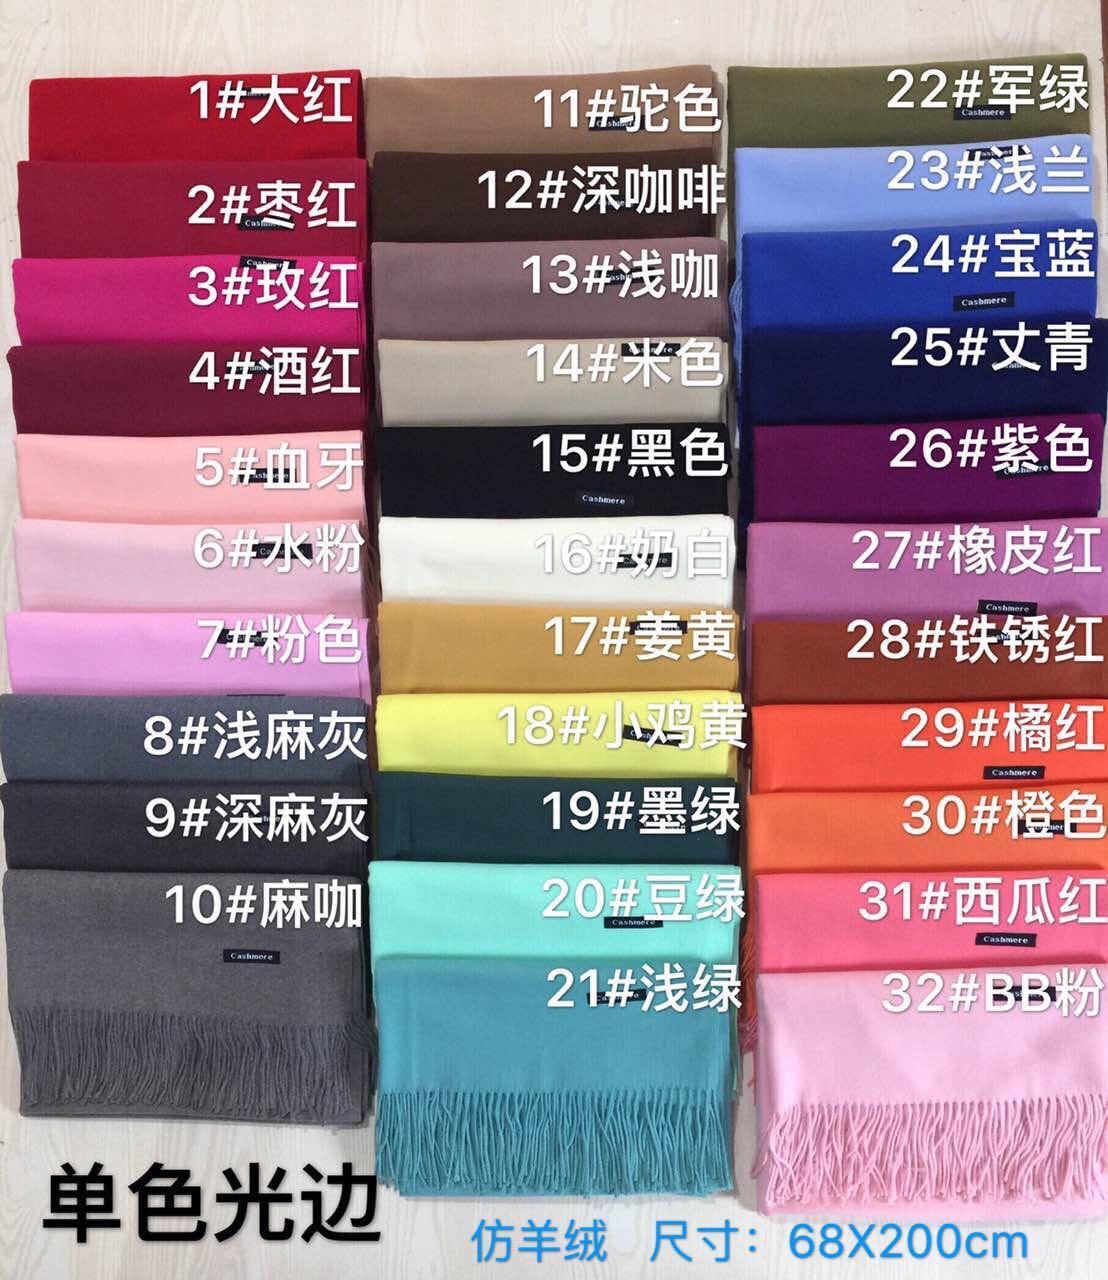 What are the processes of scarf customization